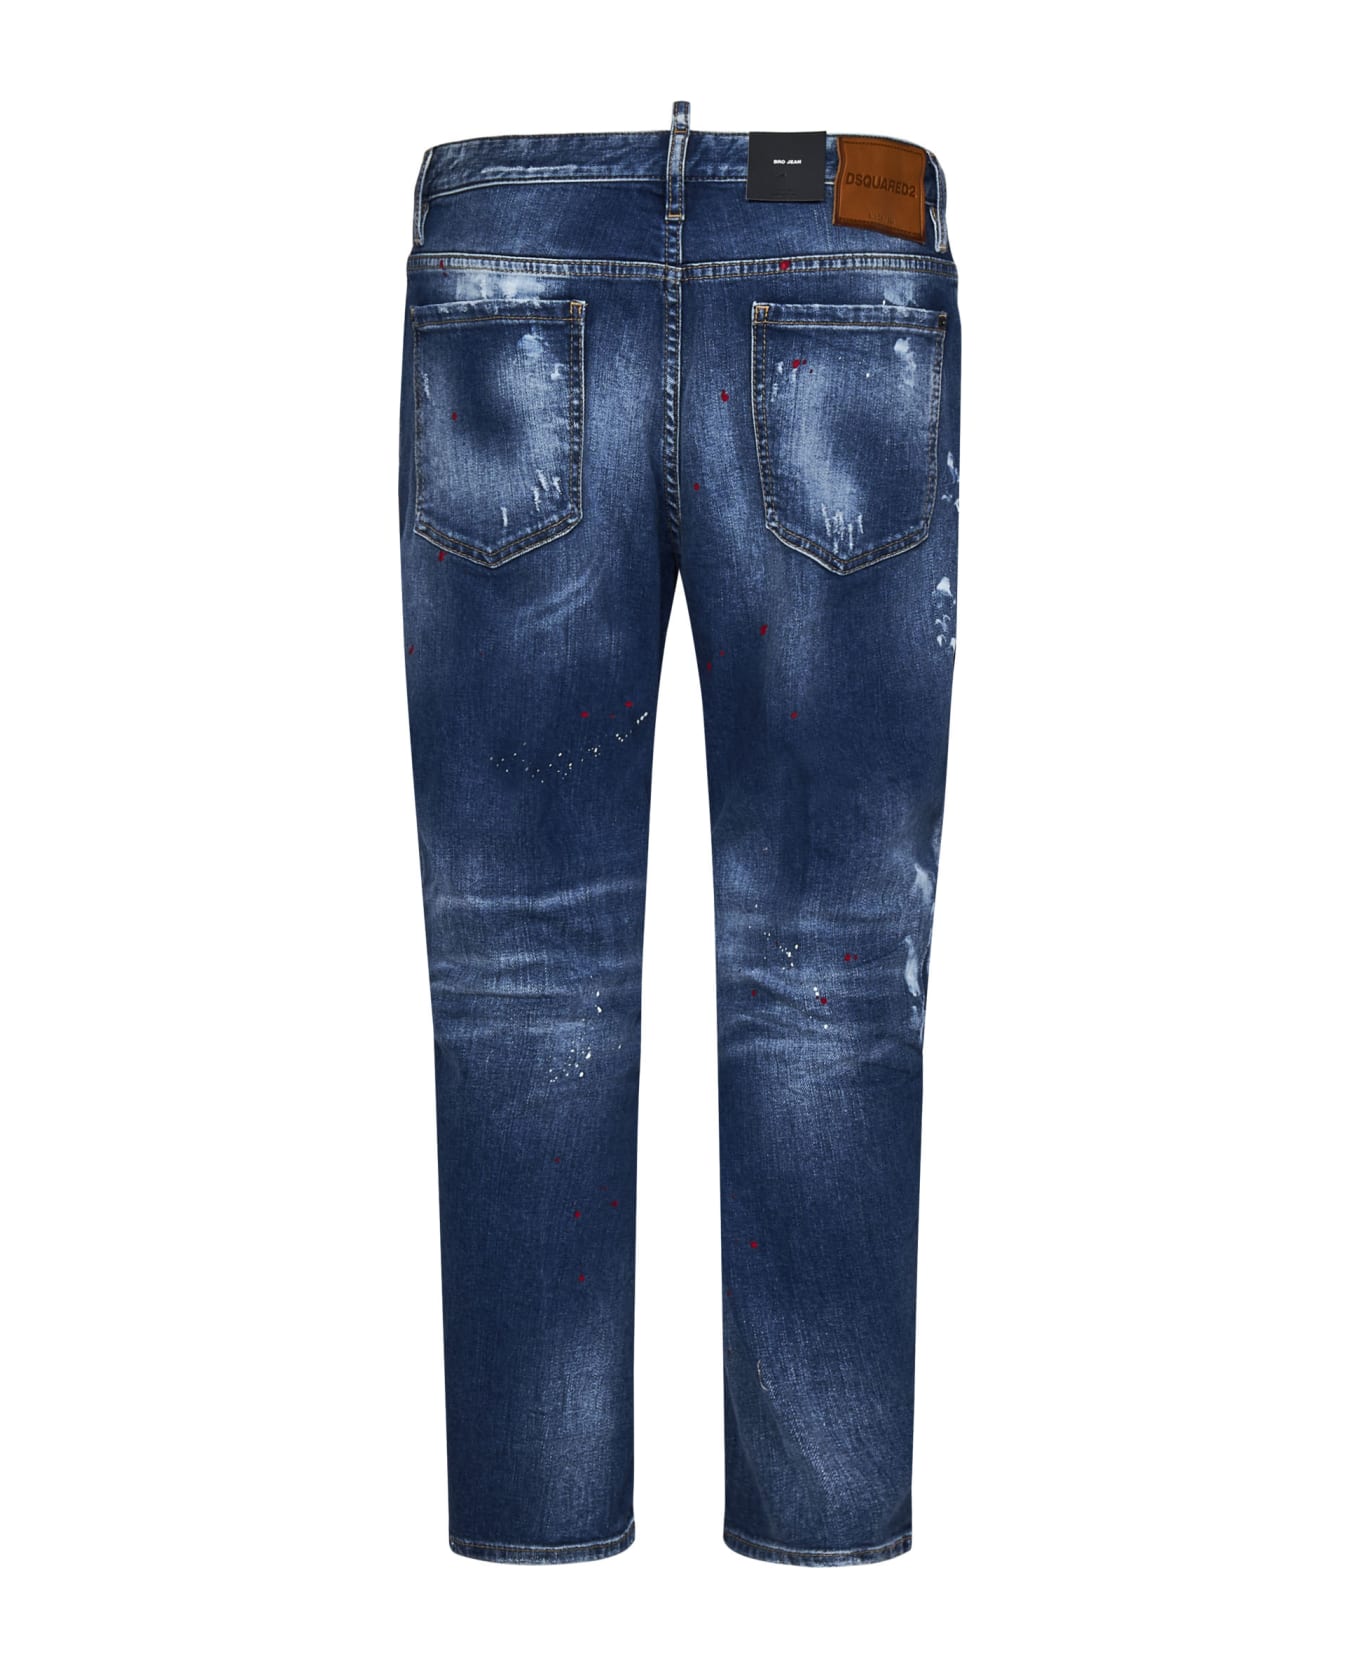 Dsquared2 Worn Out Booty Wash Bro Jeans - Blue デニム